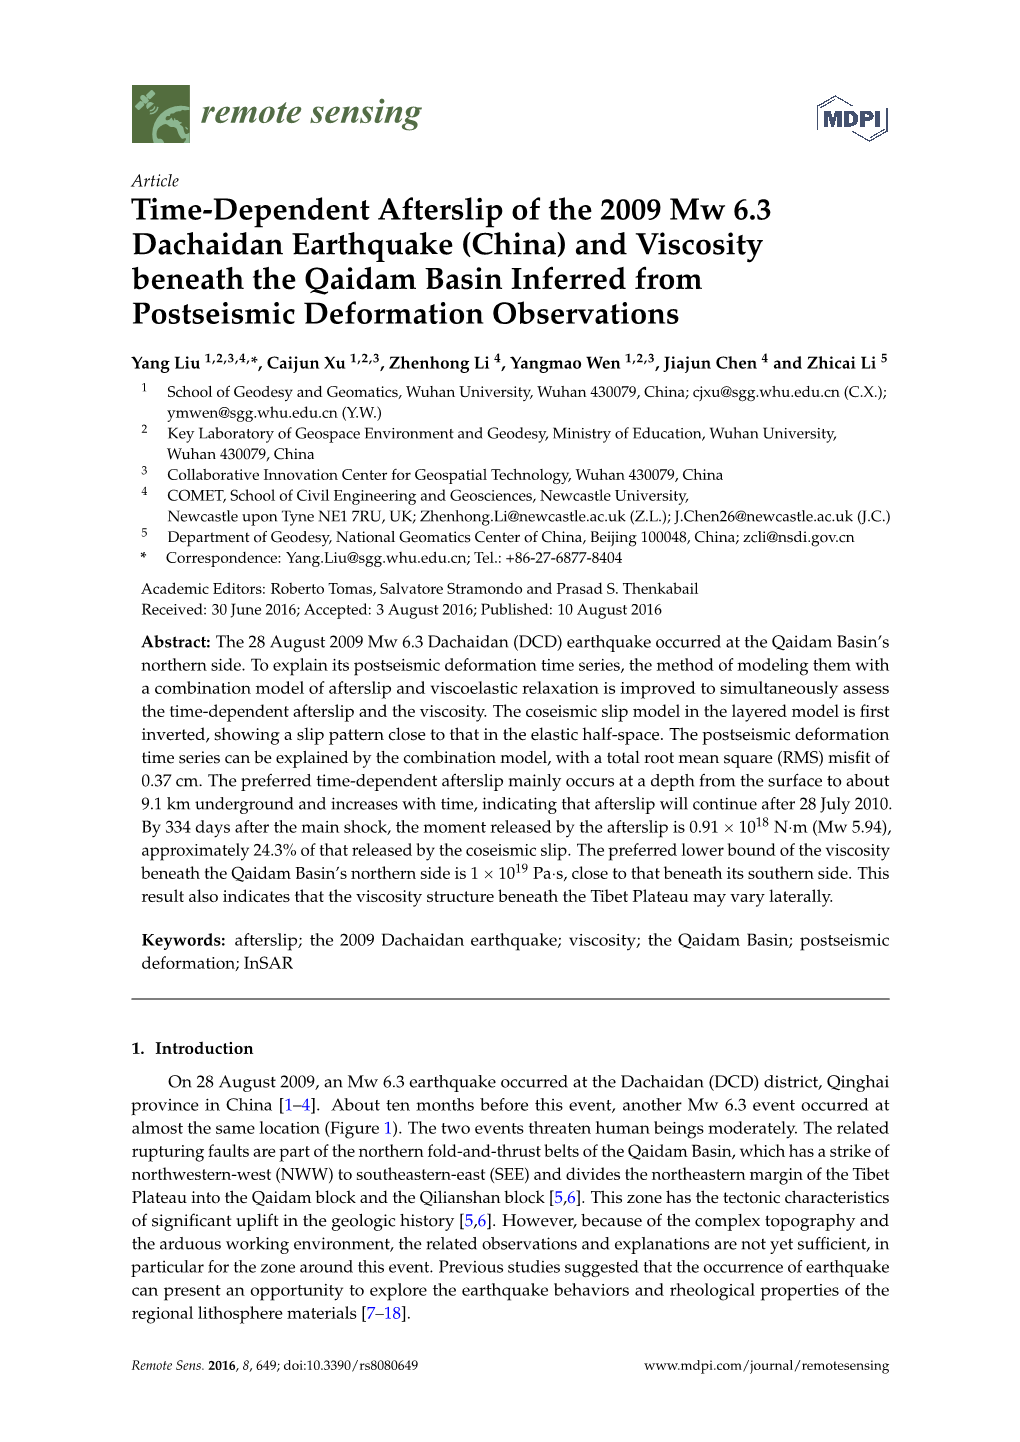 Time-Dependent Afterslip of the 2009 Mw 6.3 Dachaidan Earthquake (China) and Viscosity Beneath the Qaidam Basin Inferred from Postseismic Deformation Observations